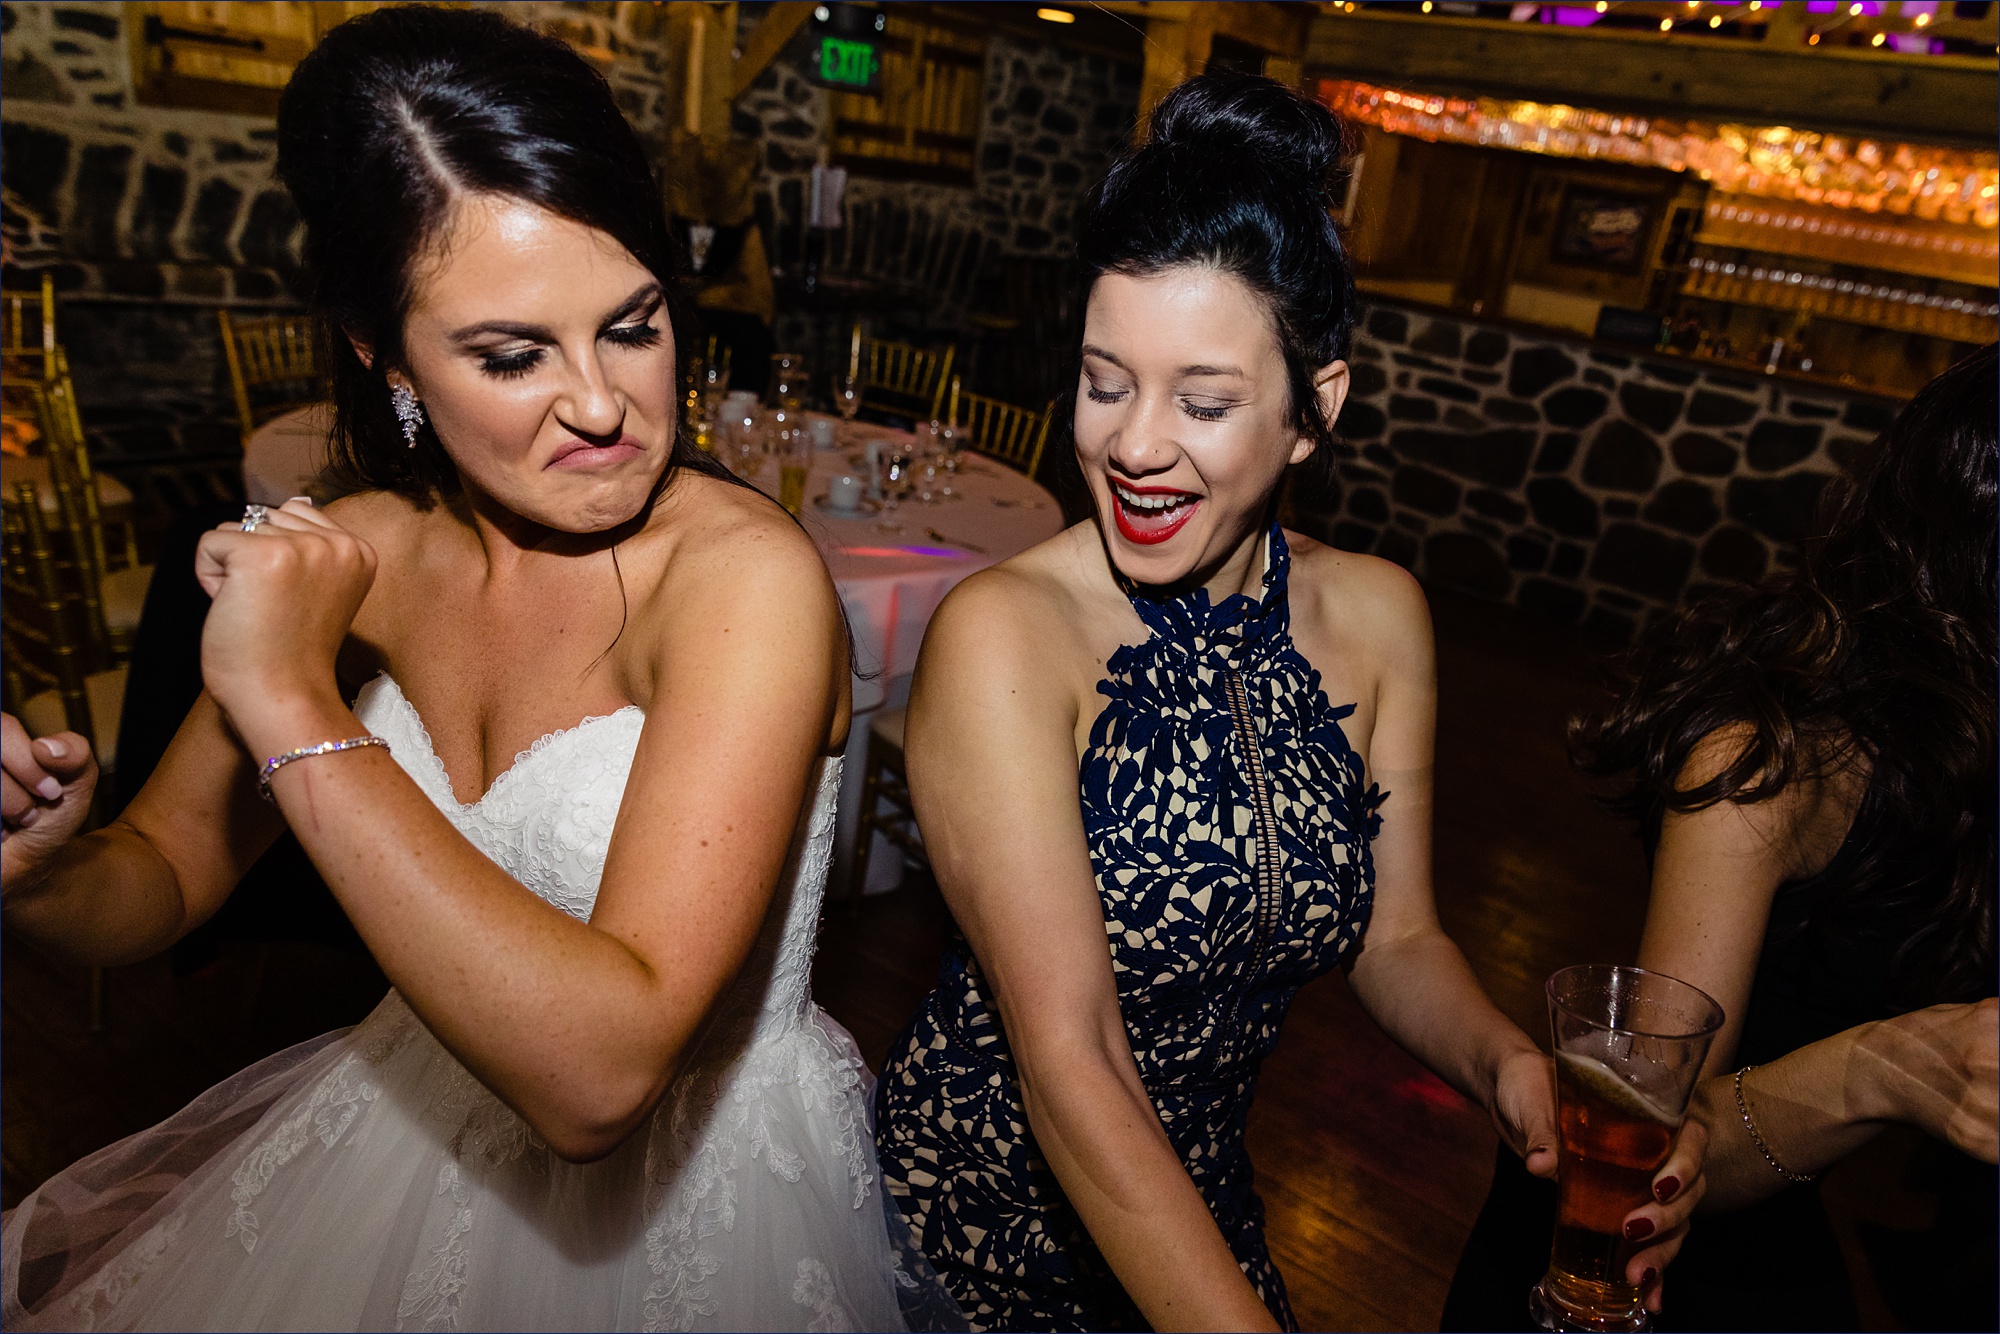 The bride dances with friends on her wedding day